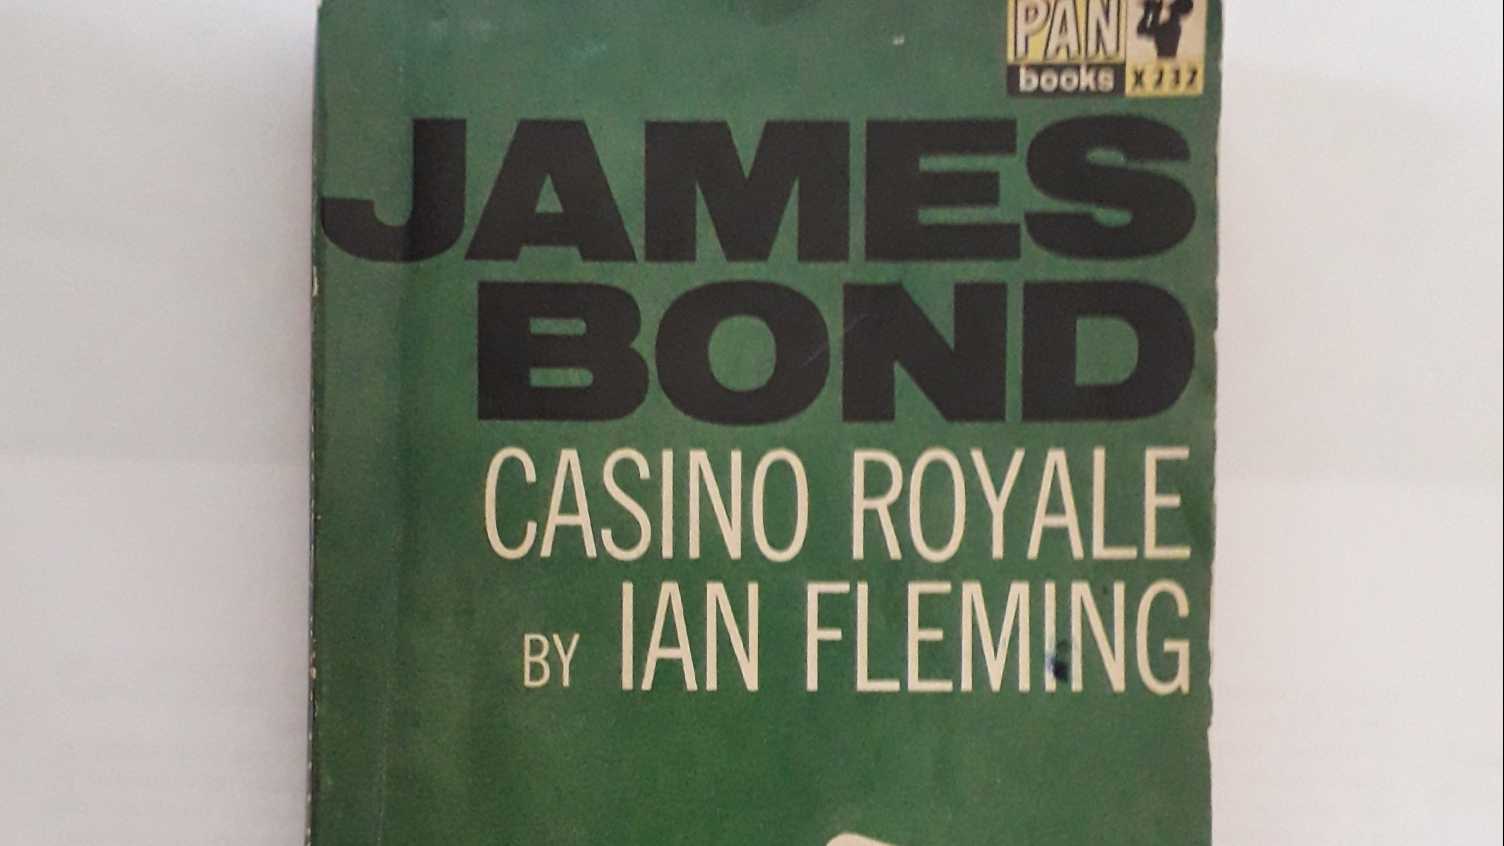 Thumbnail for Foreign Languages and the James Bond Novels | Languages and Cultures